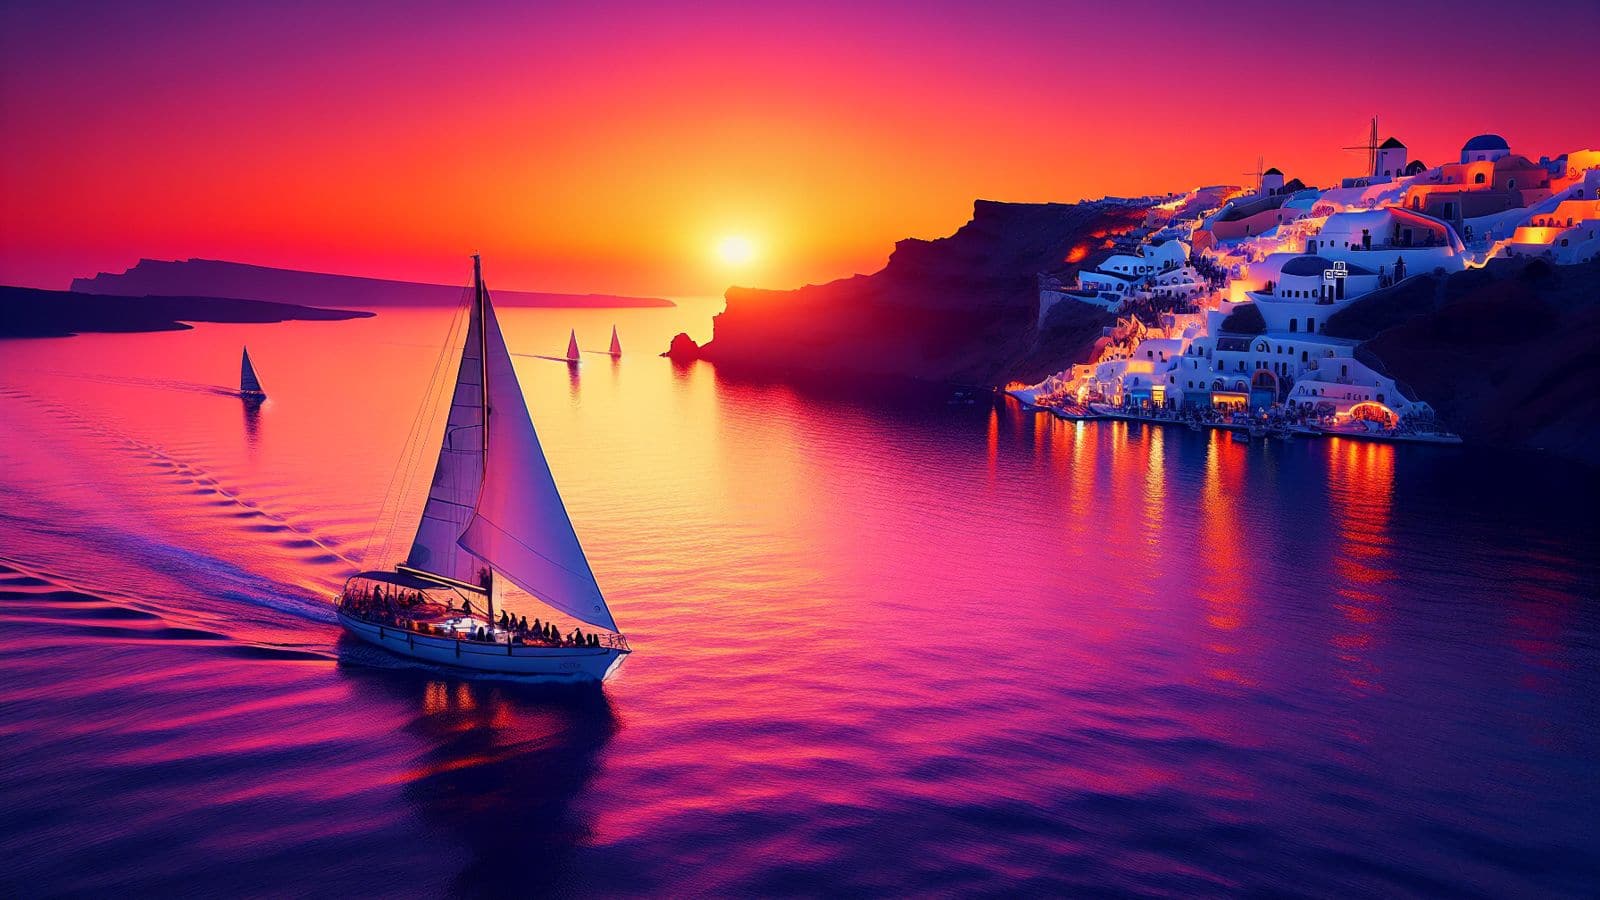 Head over to Santorini for a sunset sailing experience